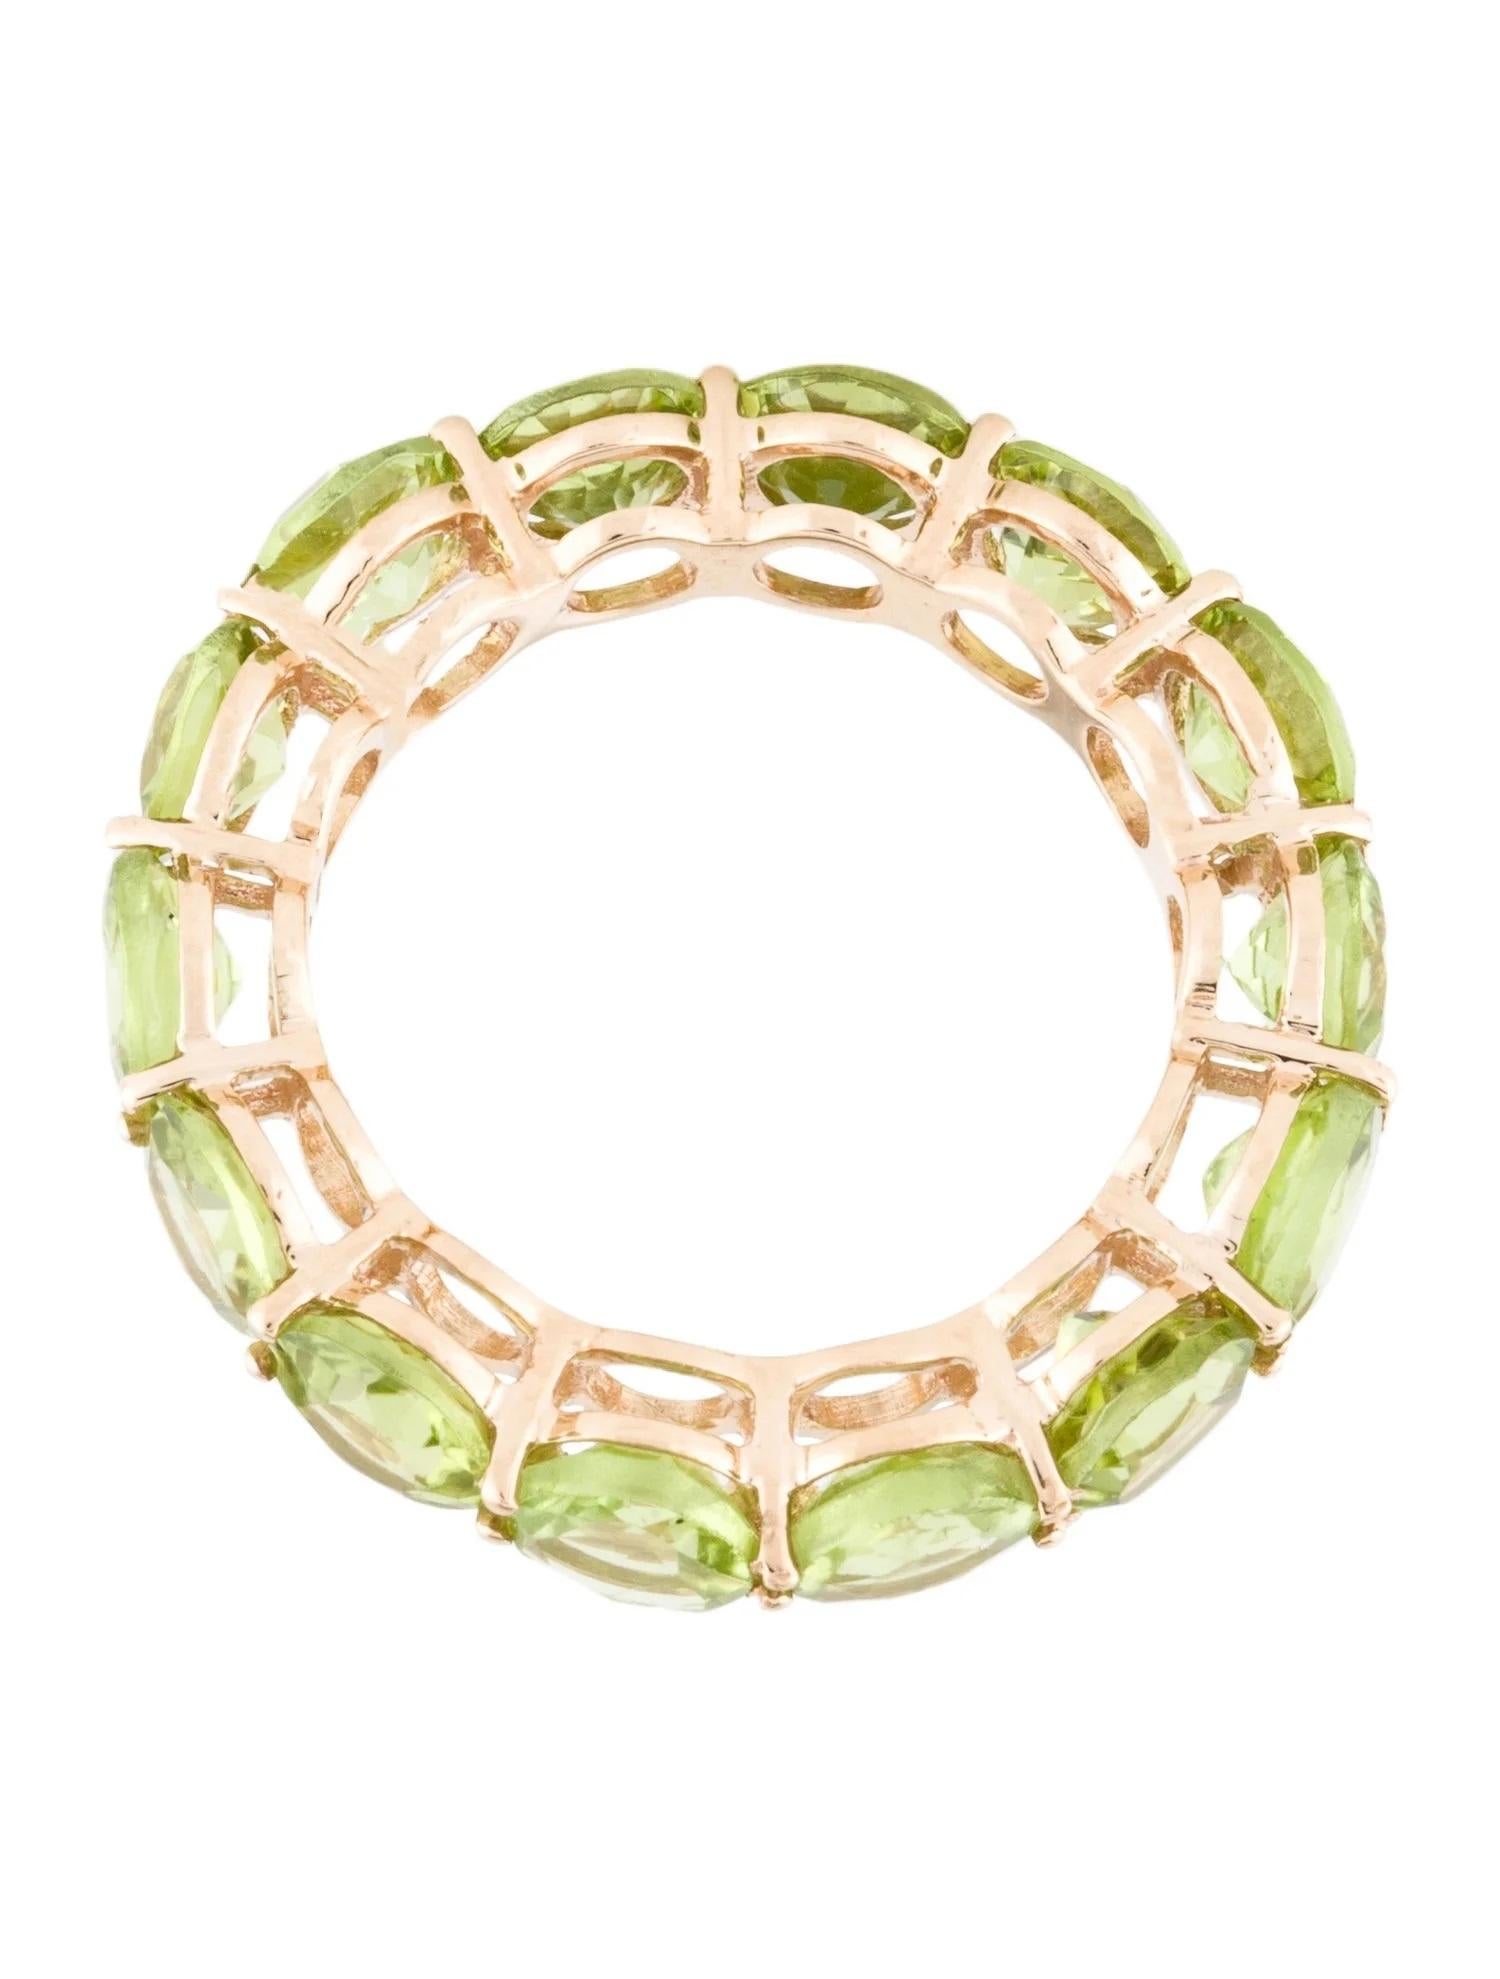 14K 6.16ctw Peridot Eternity Band Size 6.75 - Round Brilliant Green Peridot In New Condition For Sale In Holtsville, NY